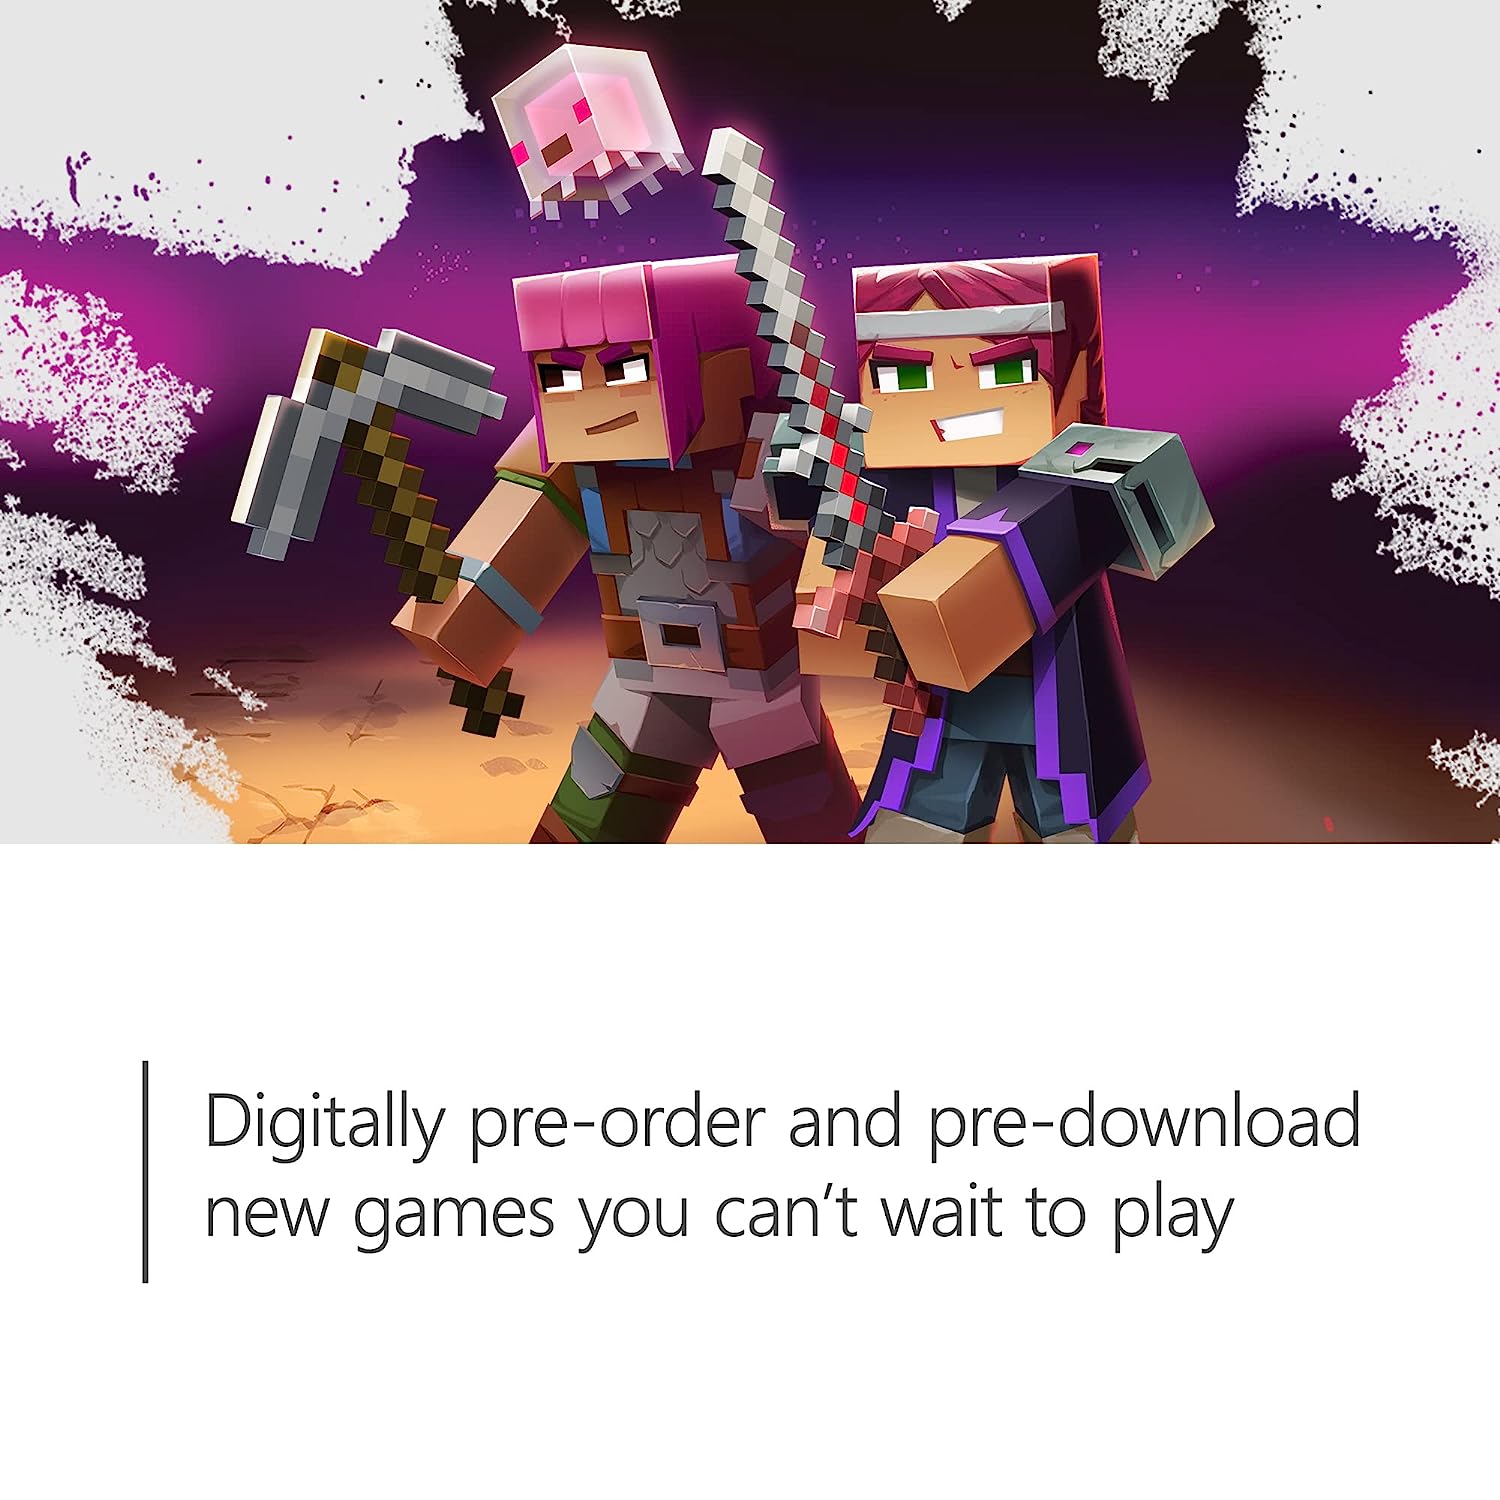 $15 Xbox Digital Gift Card | Digitally pre-order and pre-download new games you can't wait to play.